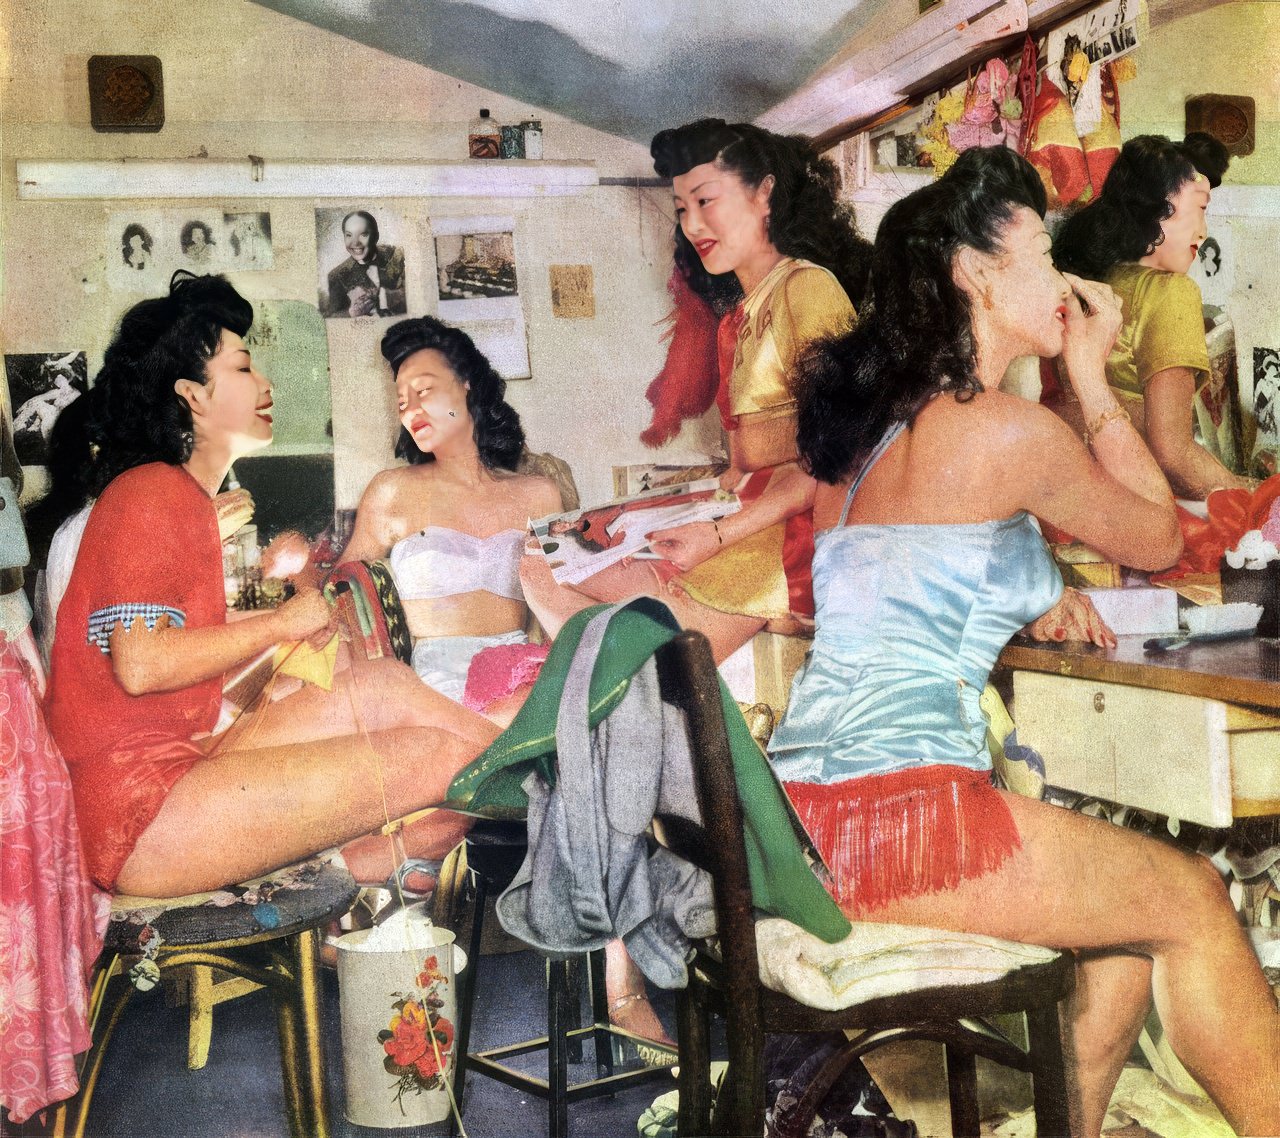 The Glorious History of the Forbidden City, America's Chinese Nightclub Gem